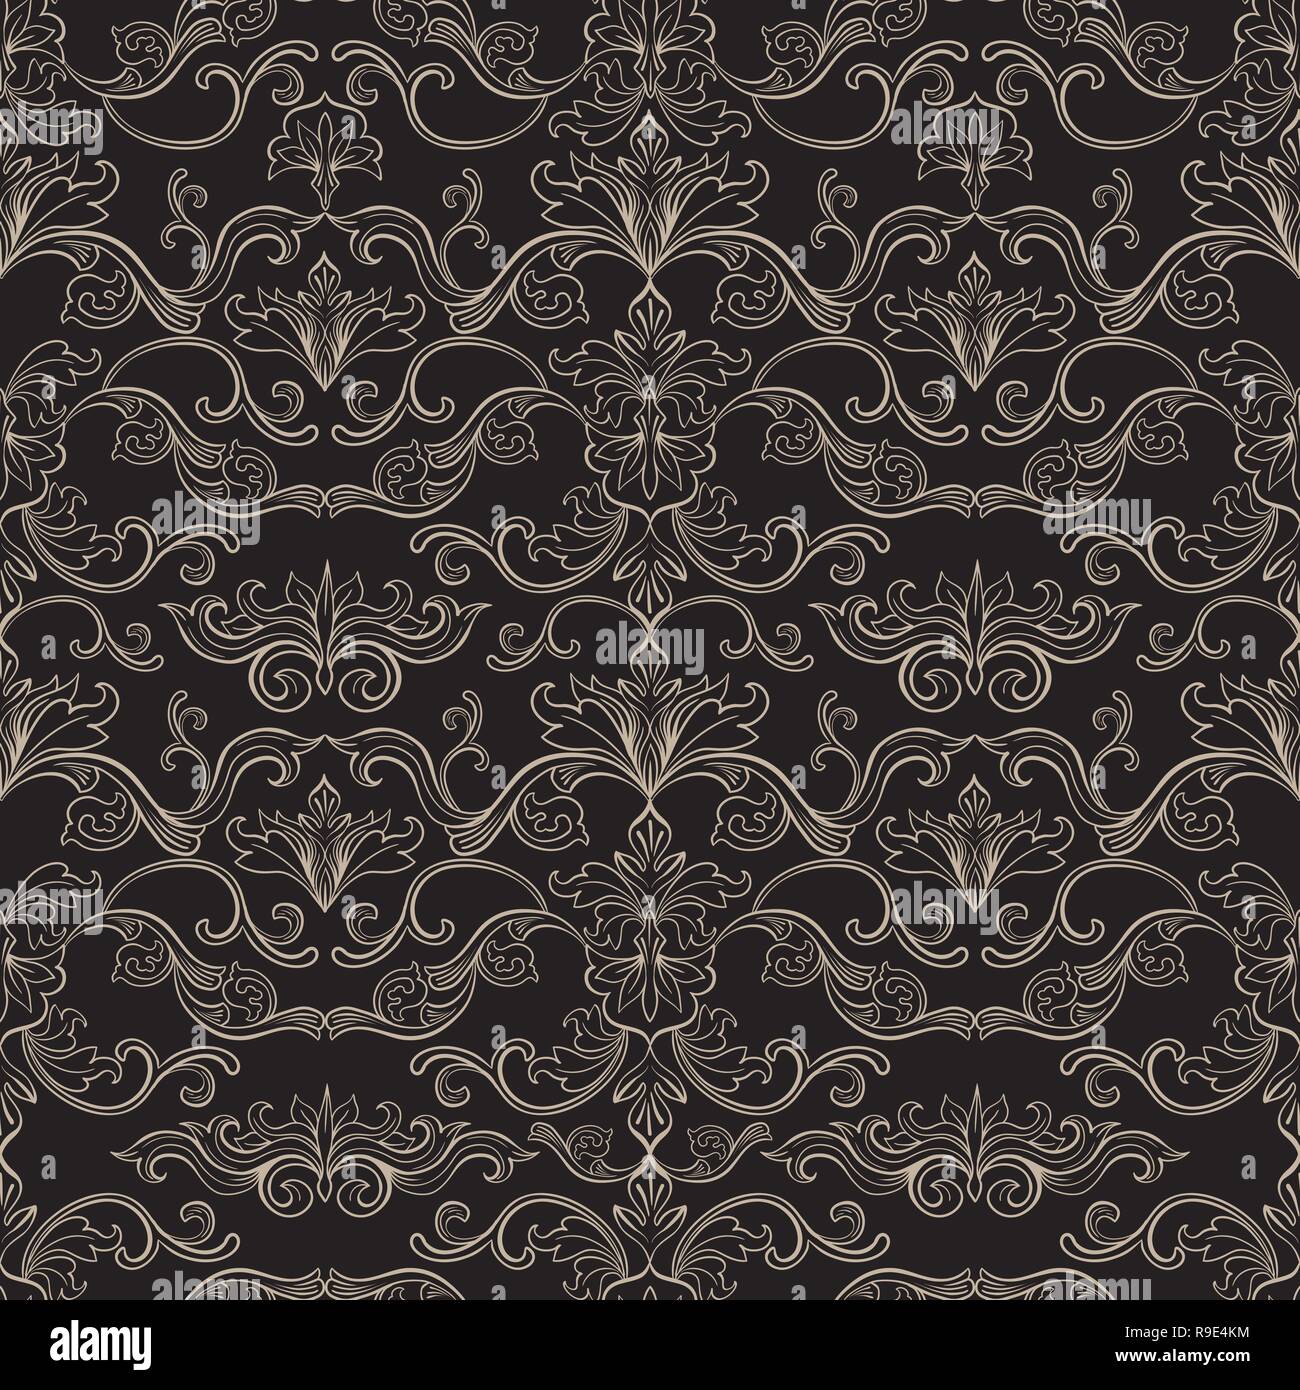 Damask Vector Seamless Pattern. Vintage Style Wallpaper, Carpet or Wrapping Paper Design. Italian Medieval Floral Flourishes, Greek Flowers for Textures. Baroque Leaves for Scrapbooking. Stock Vector